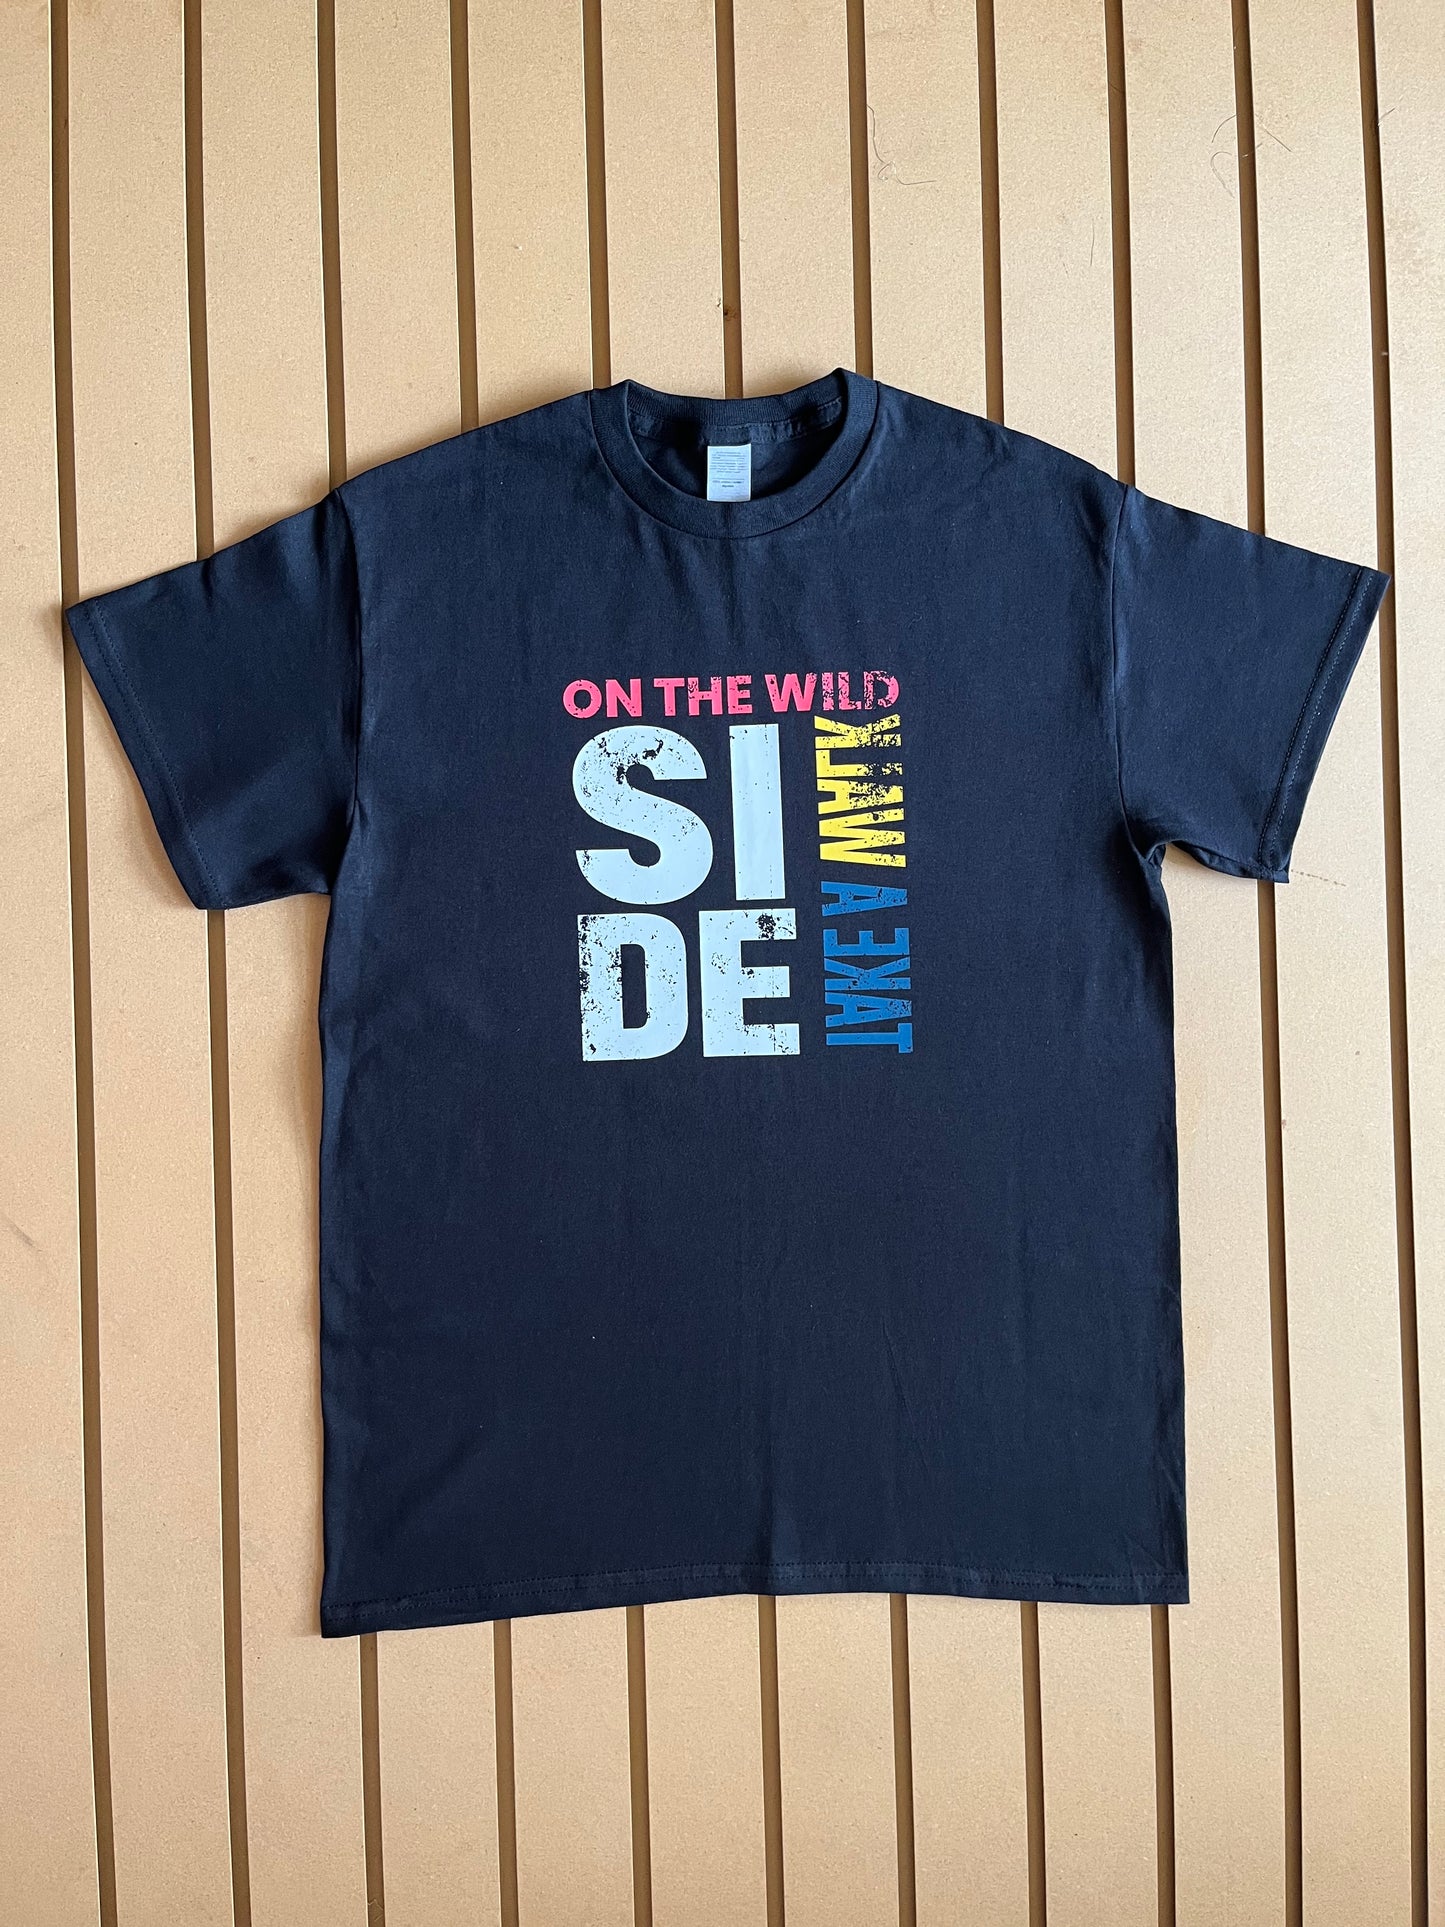 Take a walk on the wilde side (Colour Text) - Relaxed Fit Tee